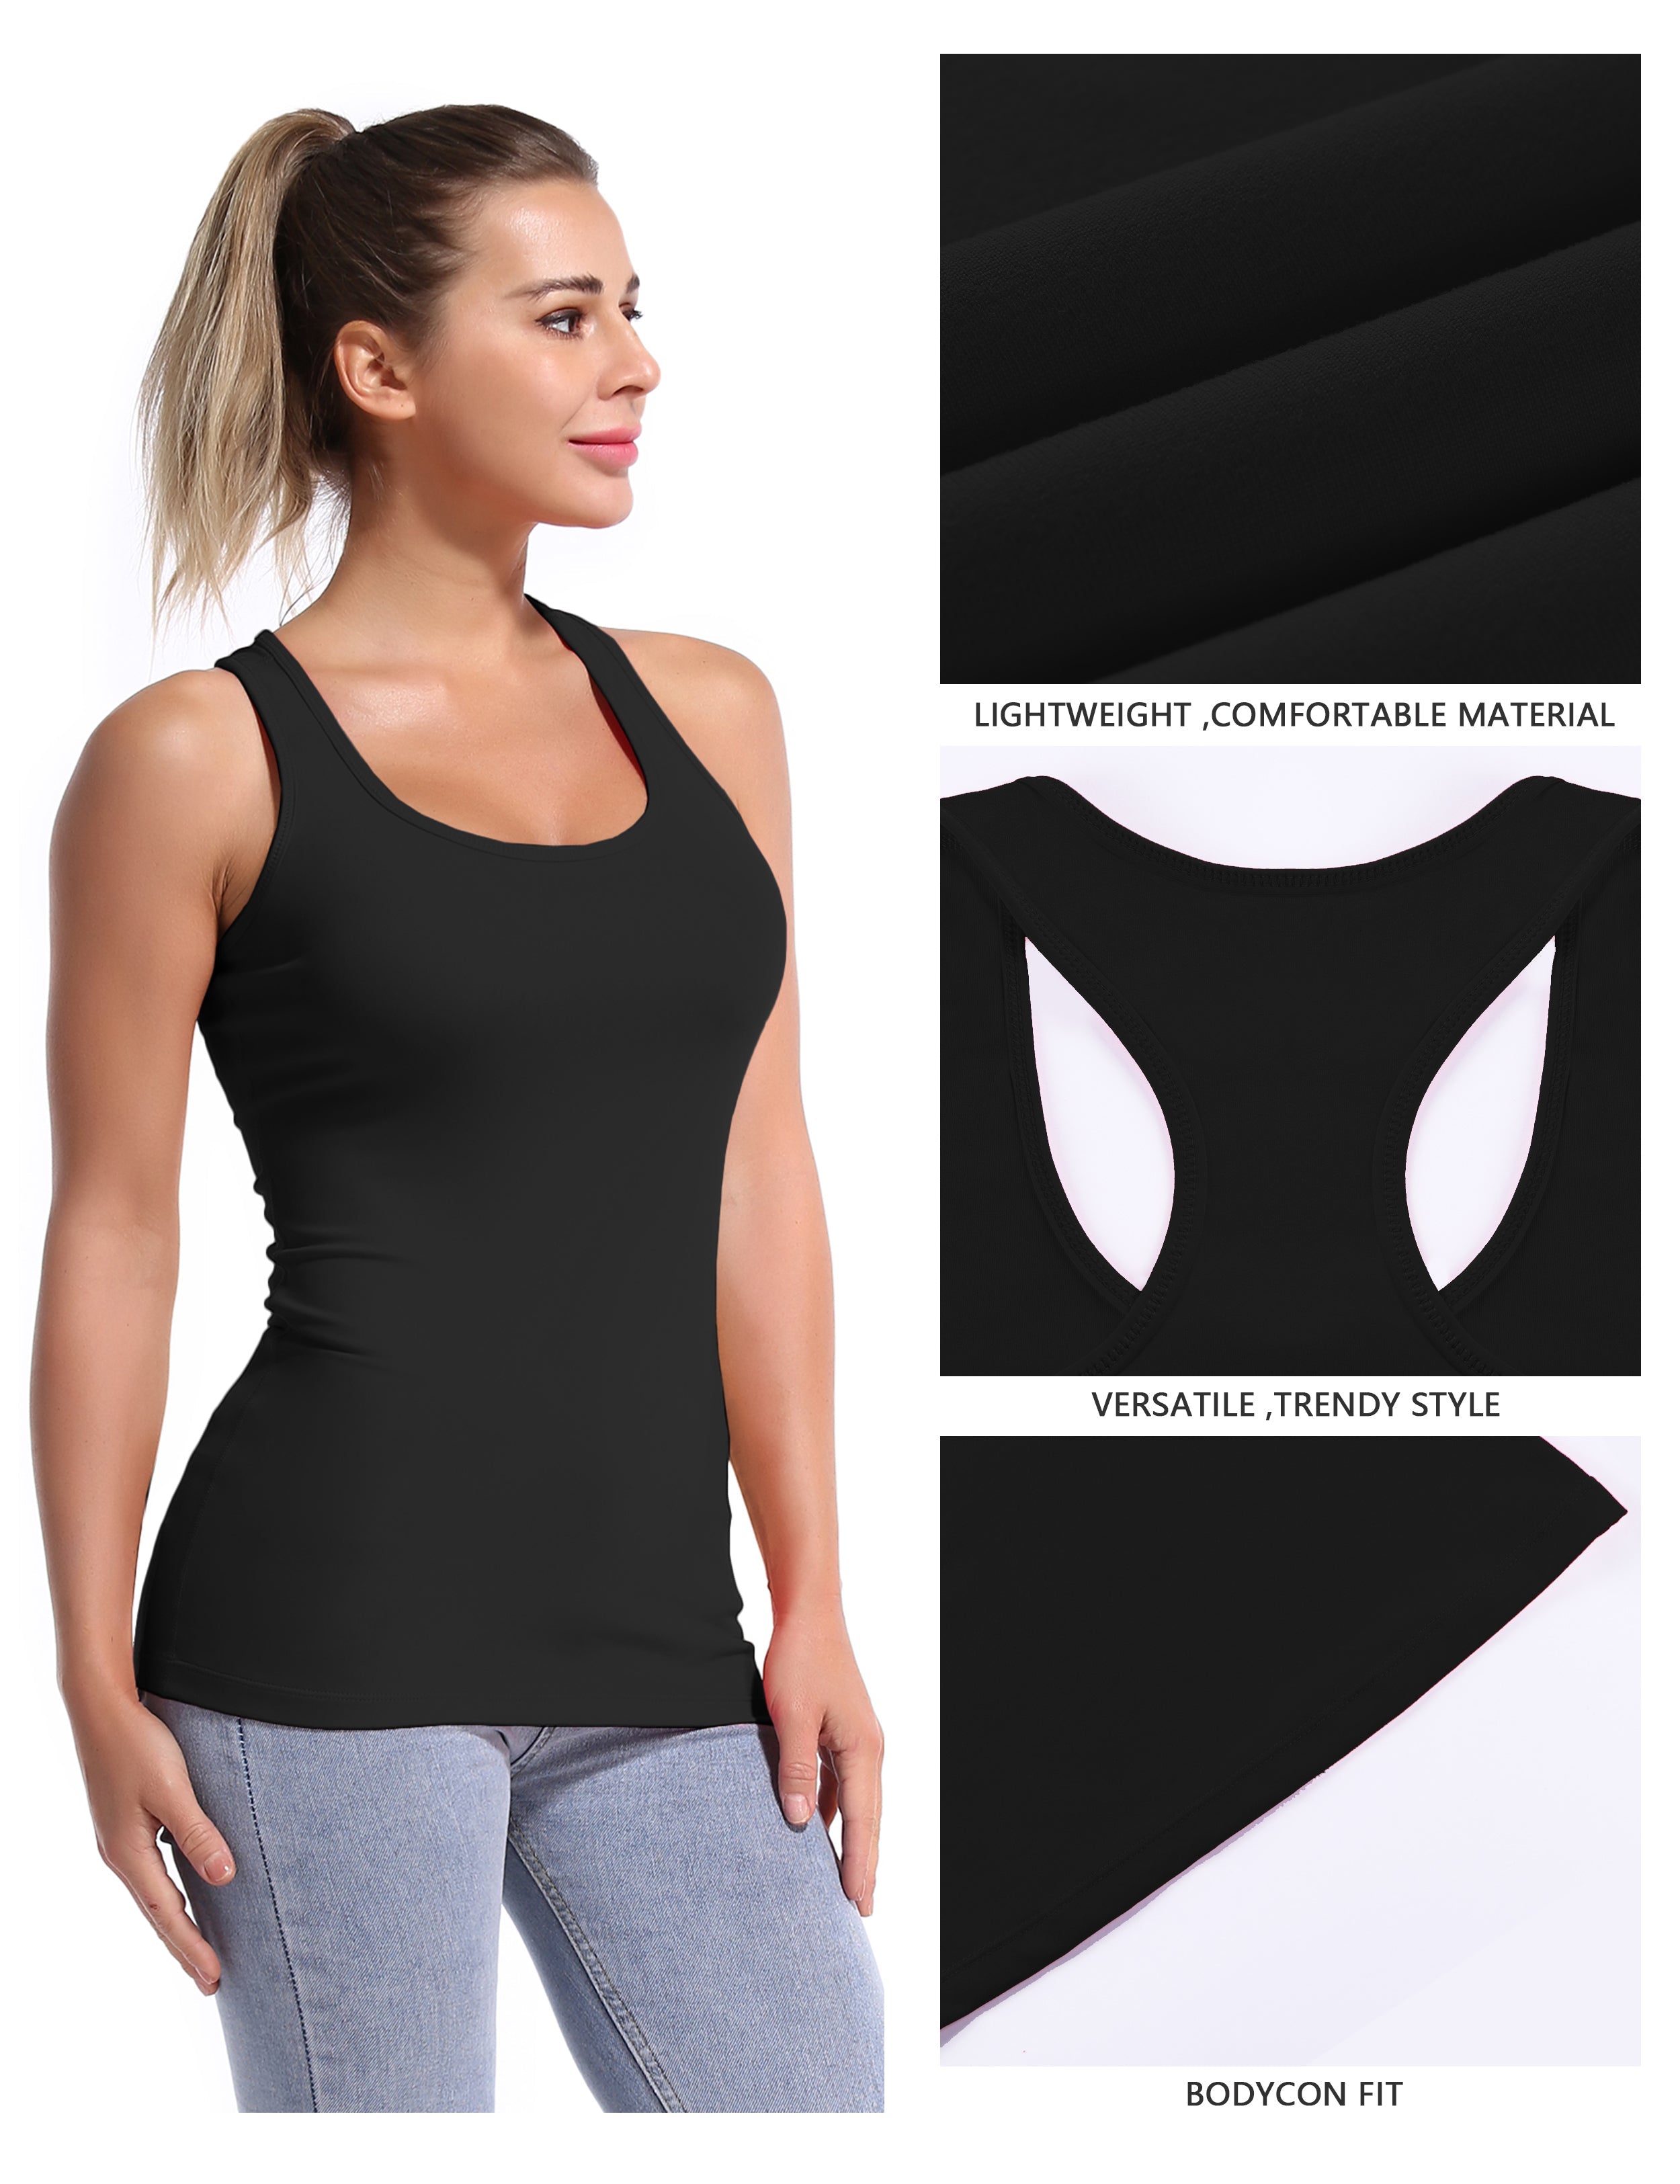 Racerback Athletic Tank Tops black 92%Nylon/8%Spandex(Cotton Soft) Designed for Tall Size Tight Fit So buttery soft, it feels weightless Sweat-wicking Four-way stretch Breathable Contours your body Sits below the waistband for moderate, everyday coverage